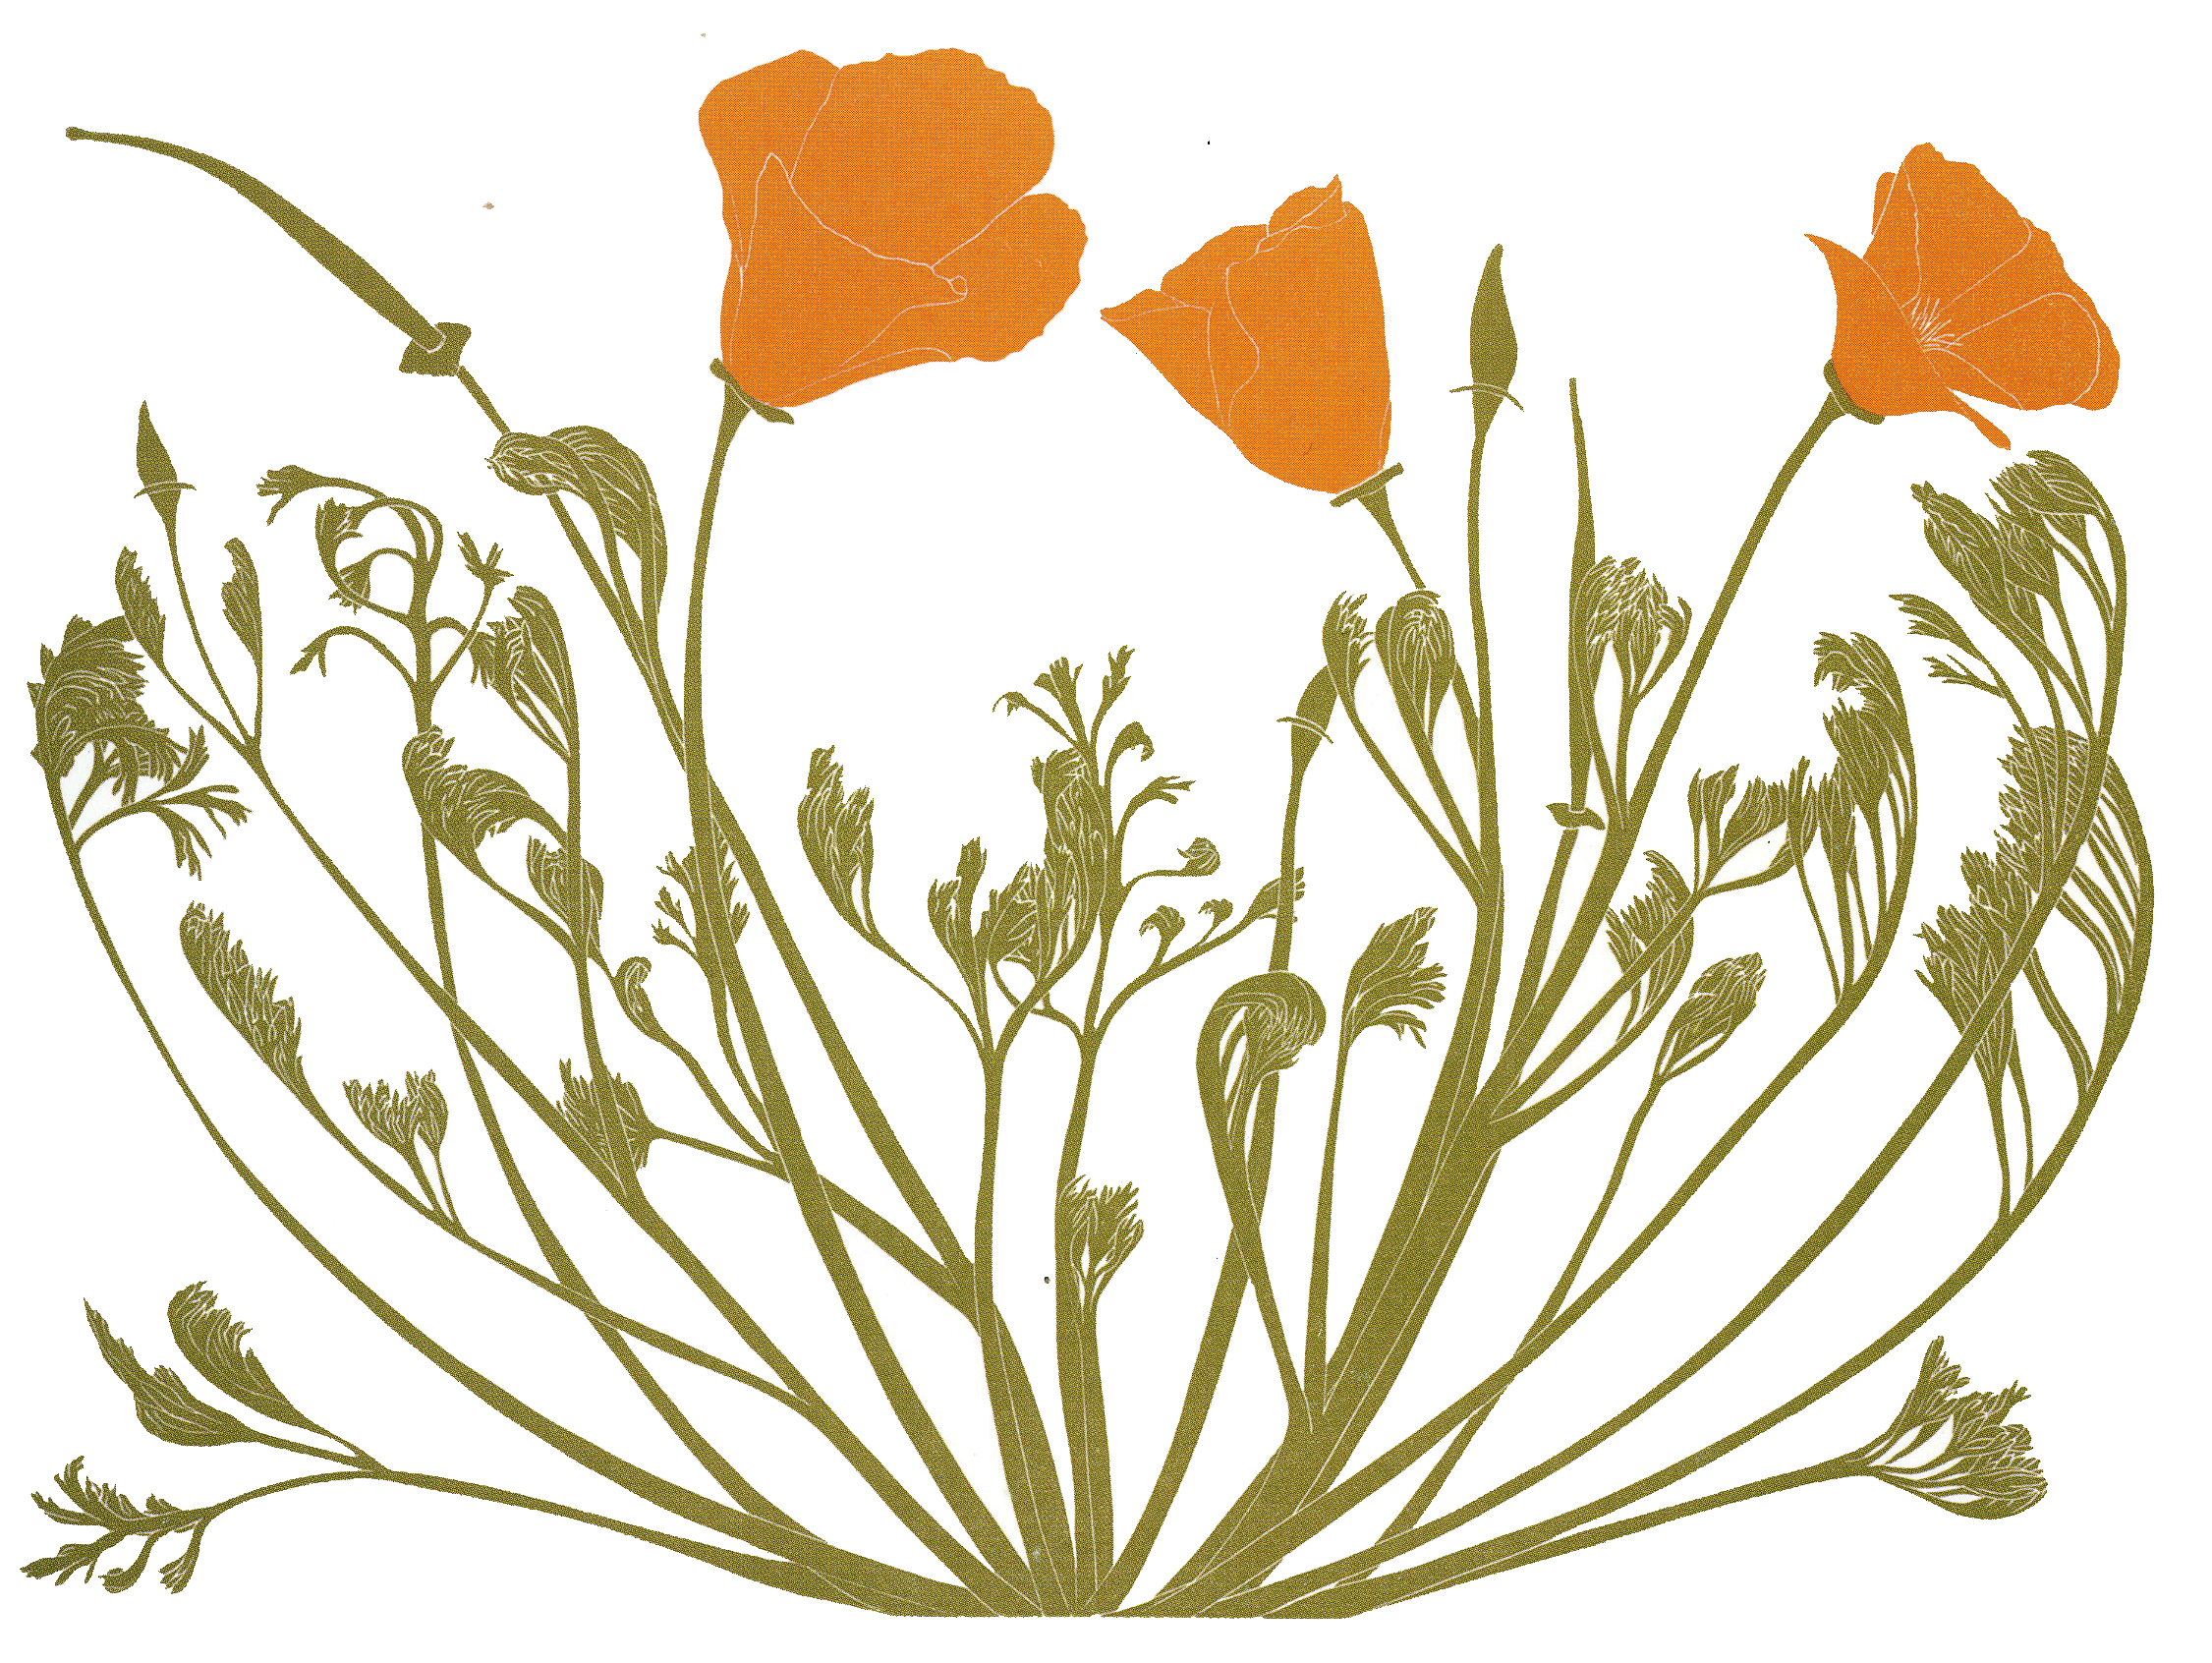 A detailed illustration of a plant, featuring three prominent orange flowers with intricate green stems and leaves